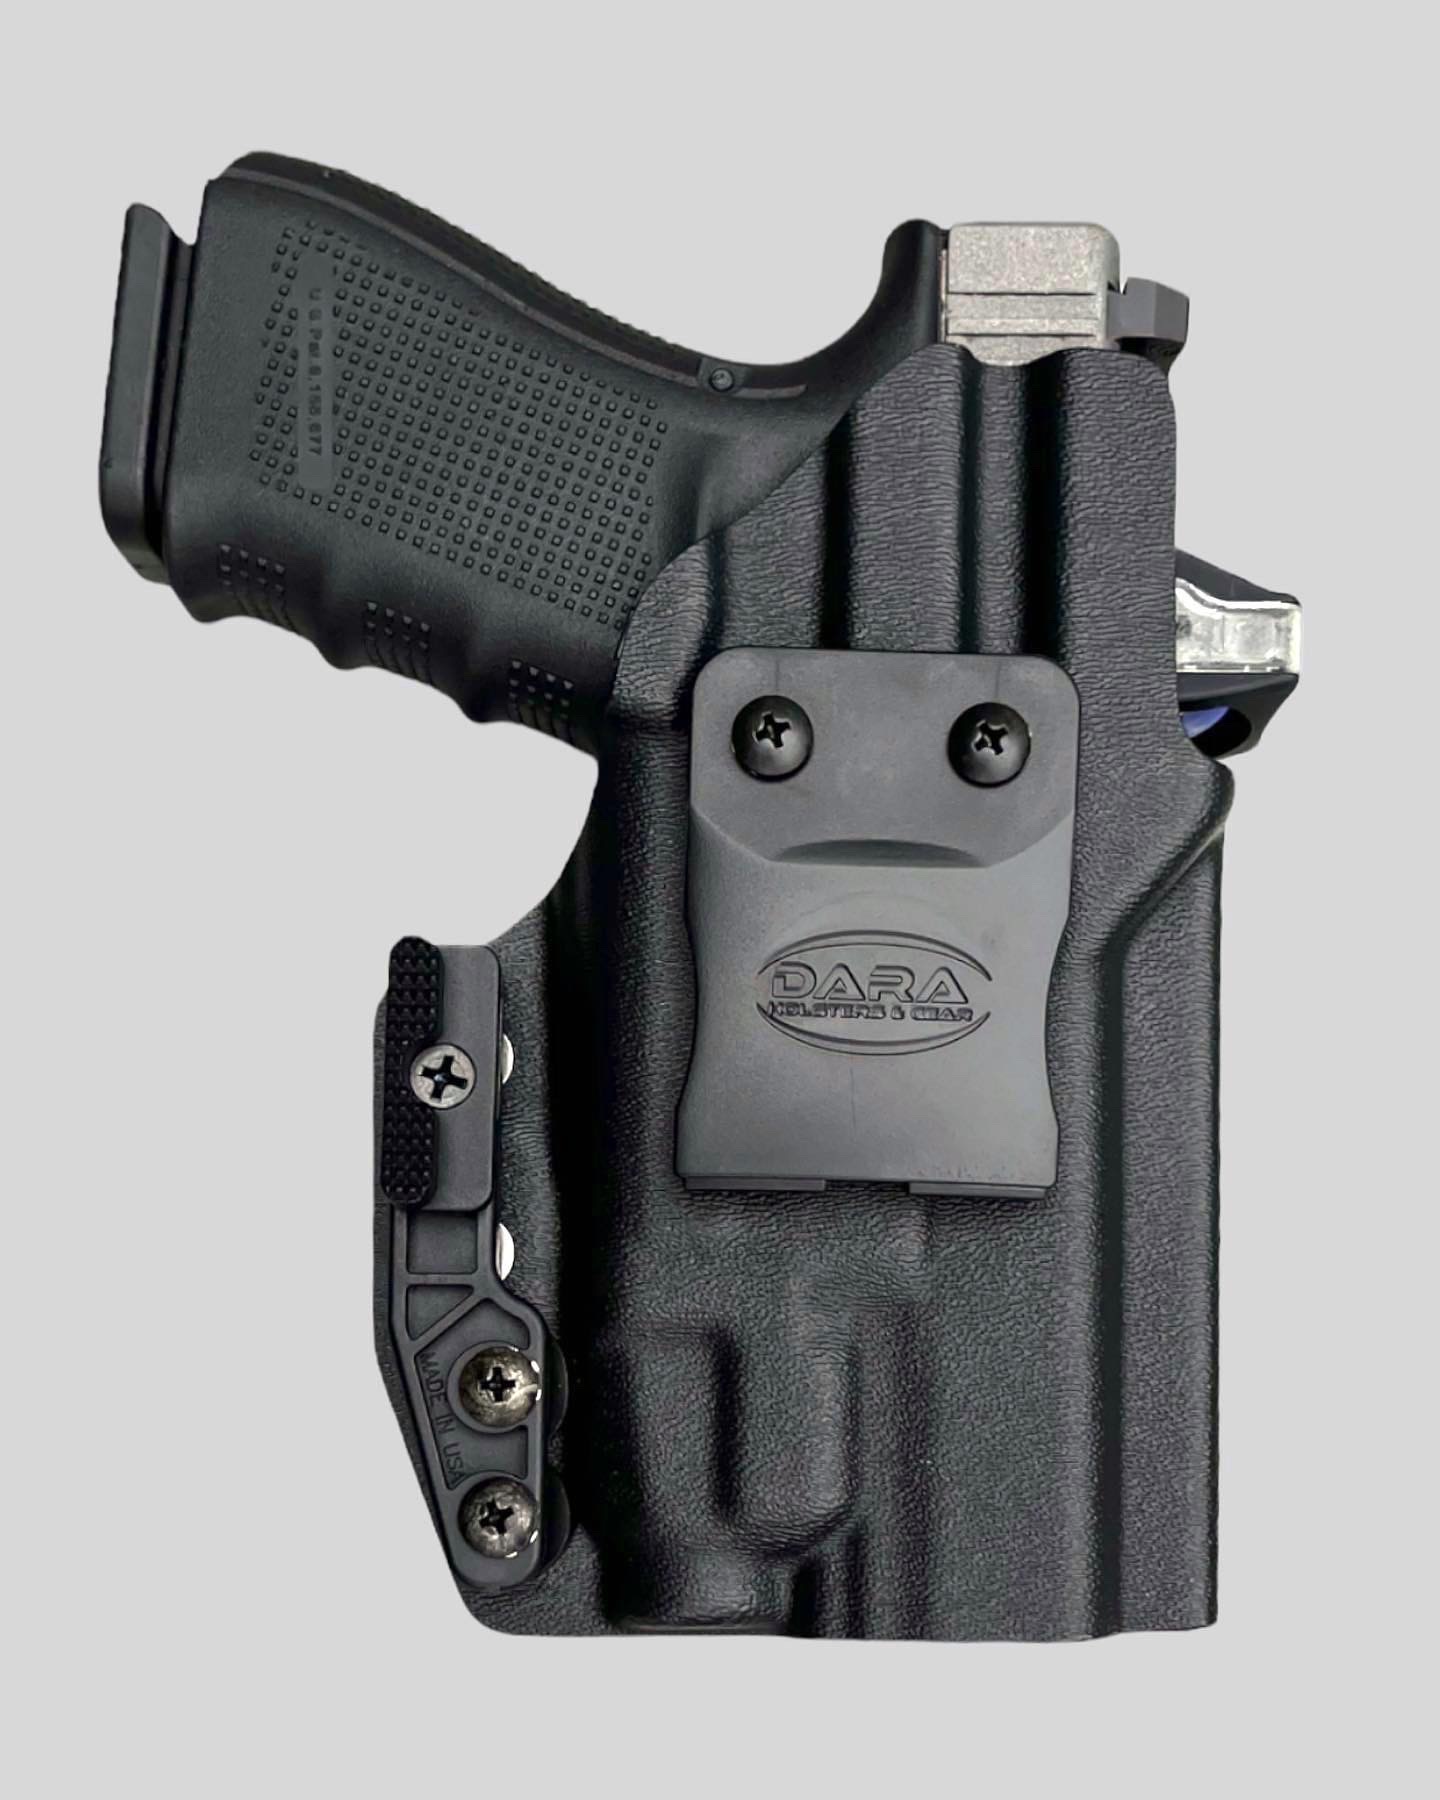 IWB concealment holster for Glock G48 with laser or light 